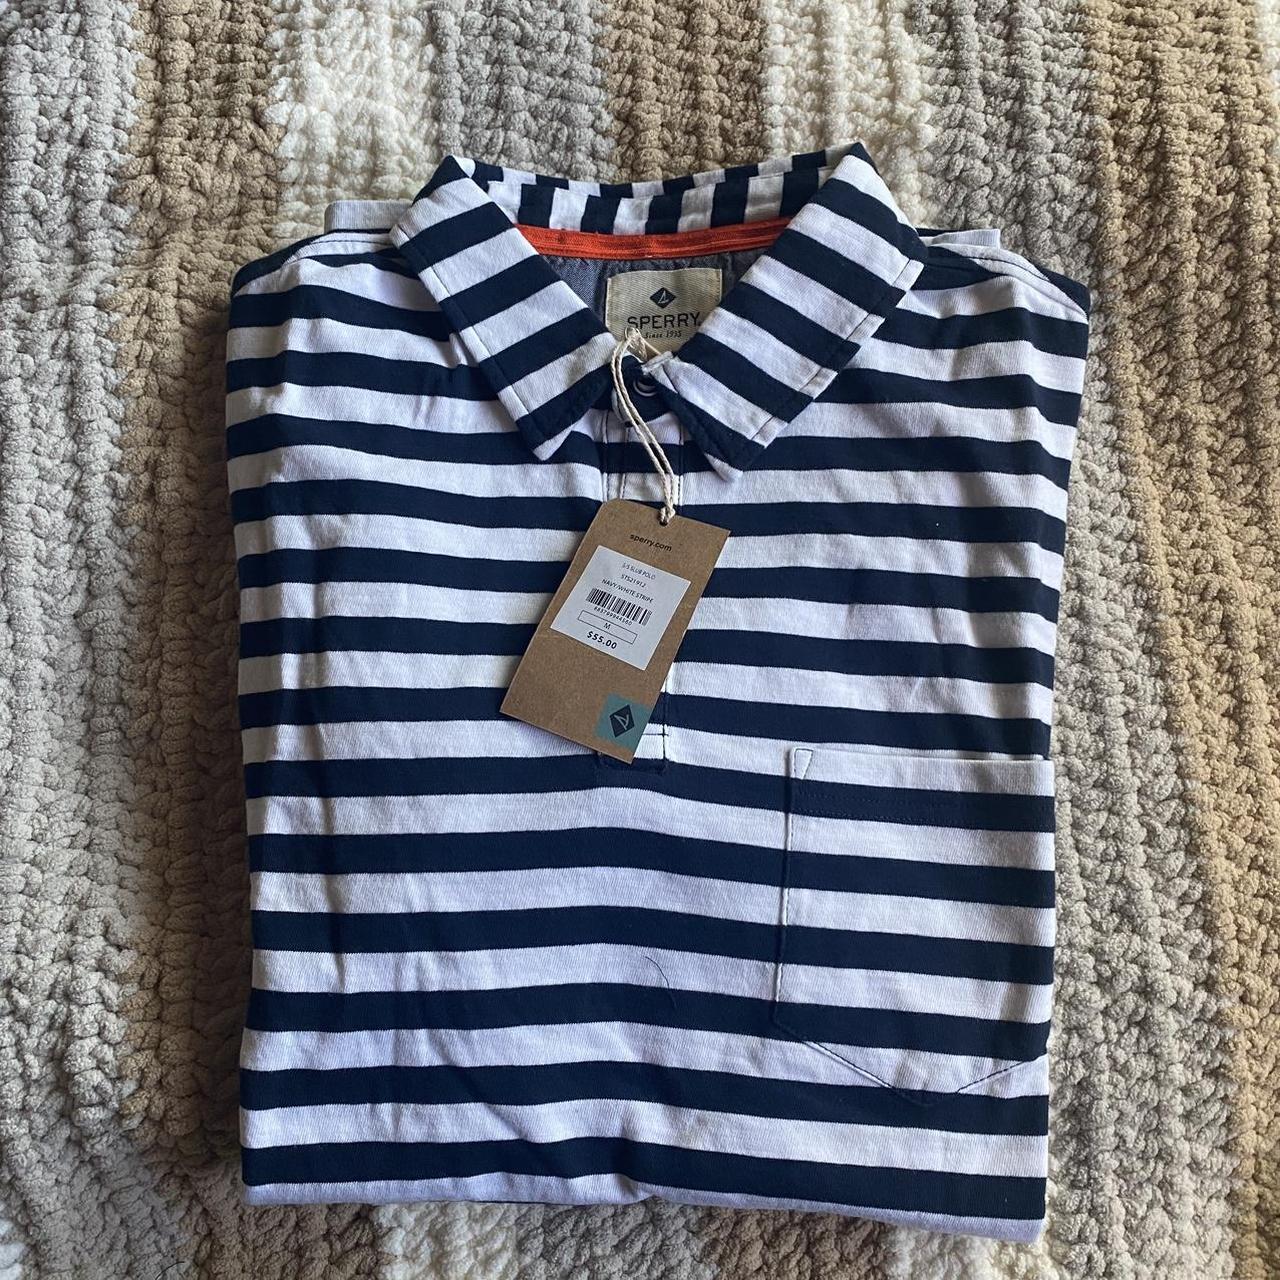 Sperry Men's Navy and White T-shirt